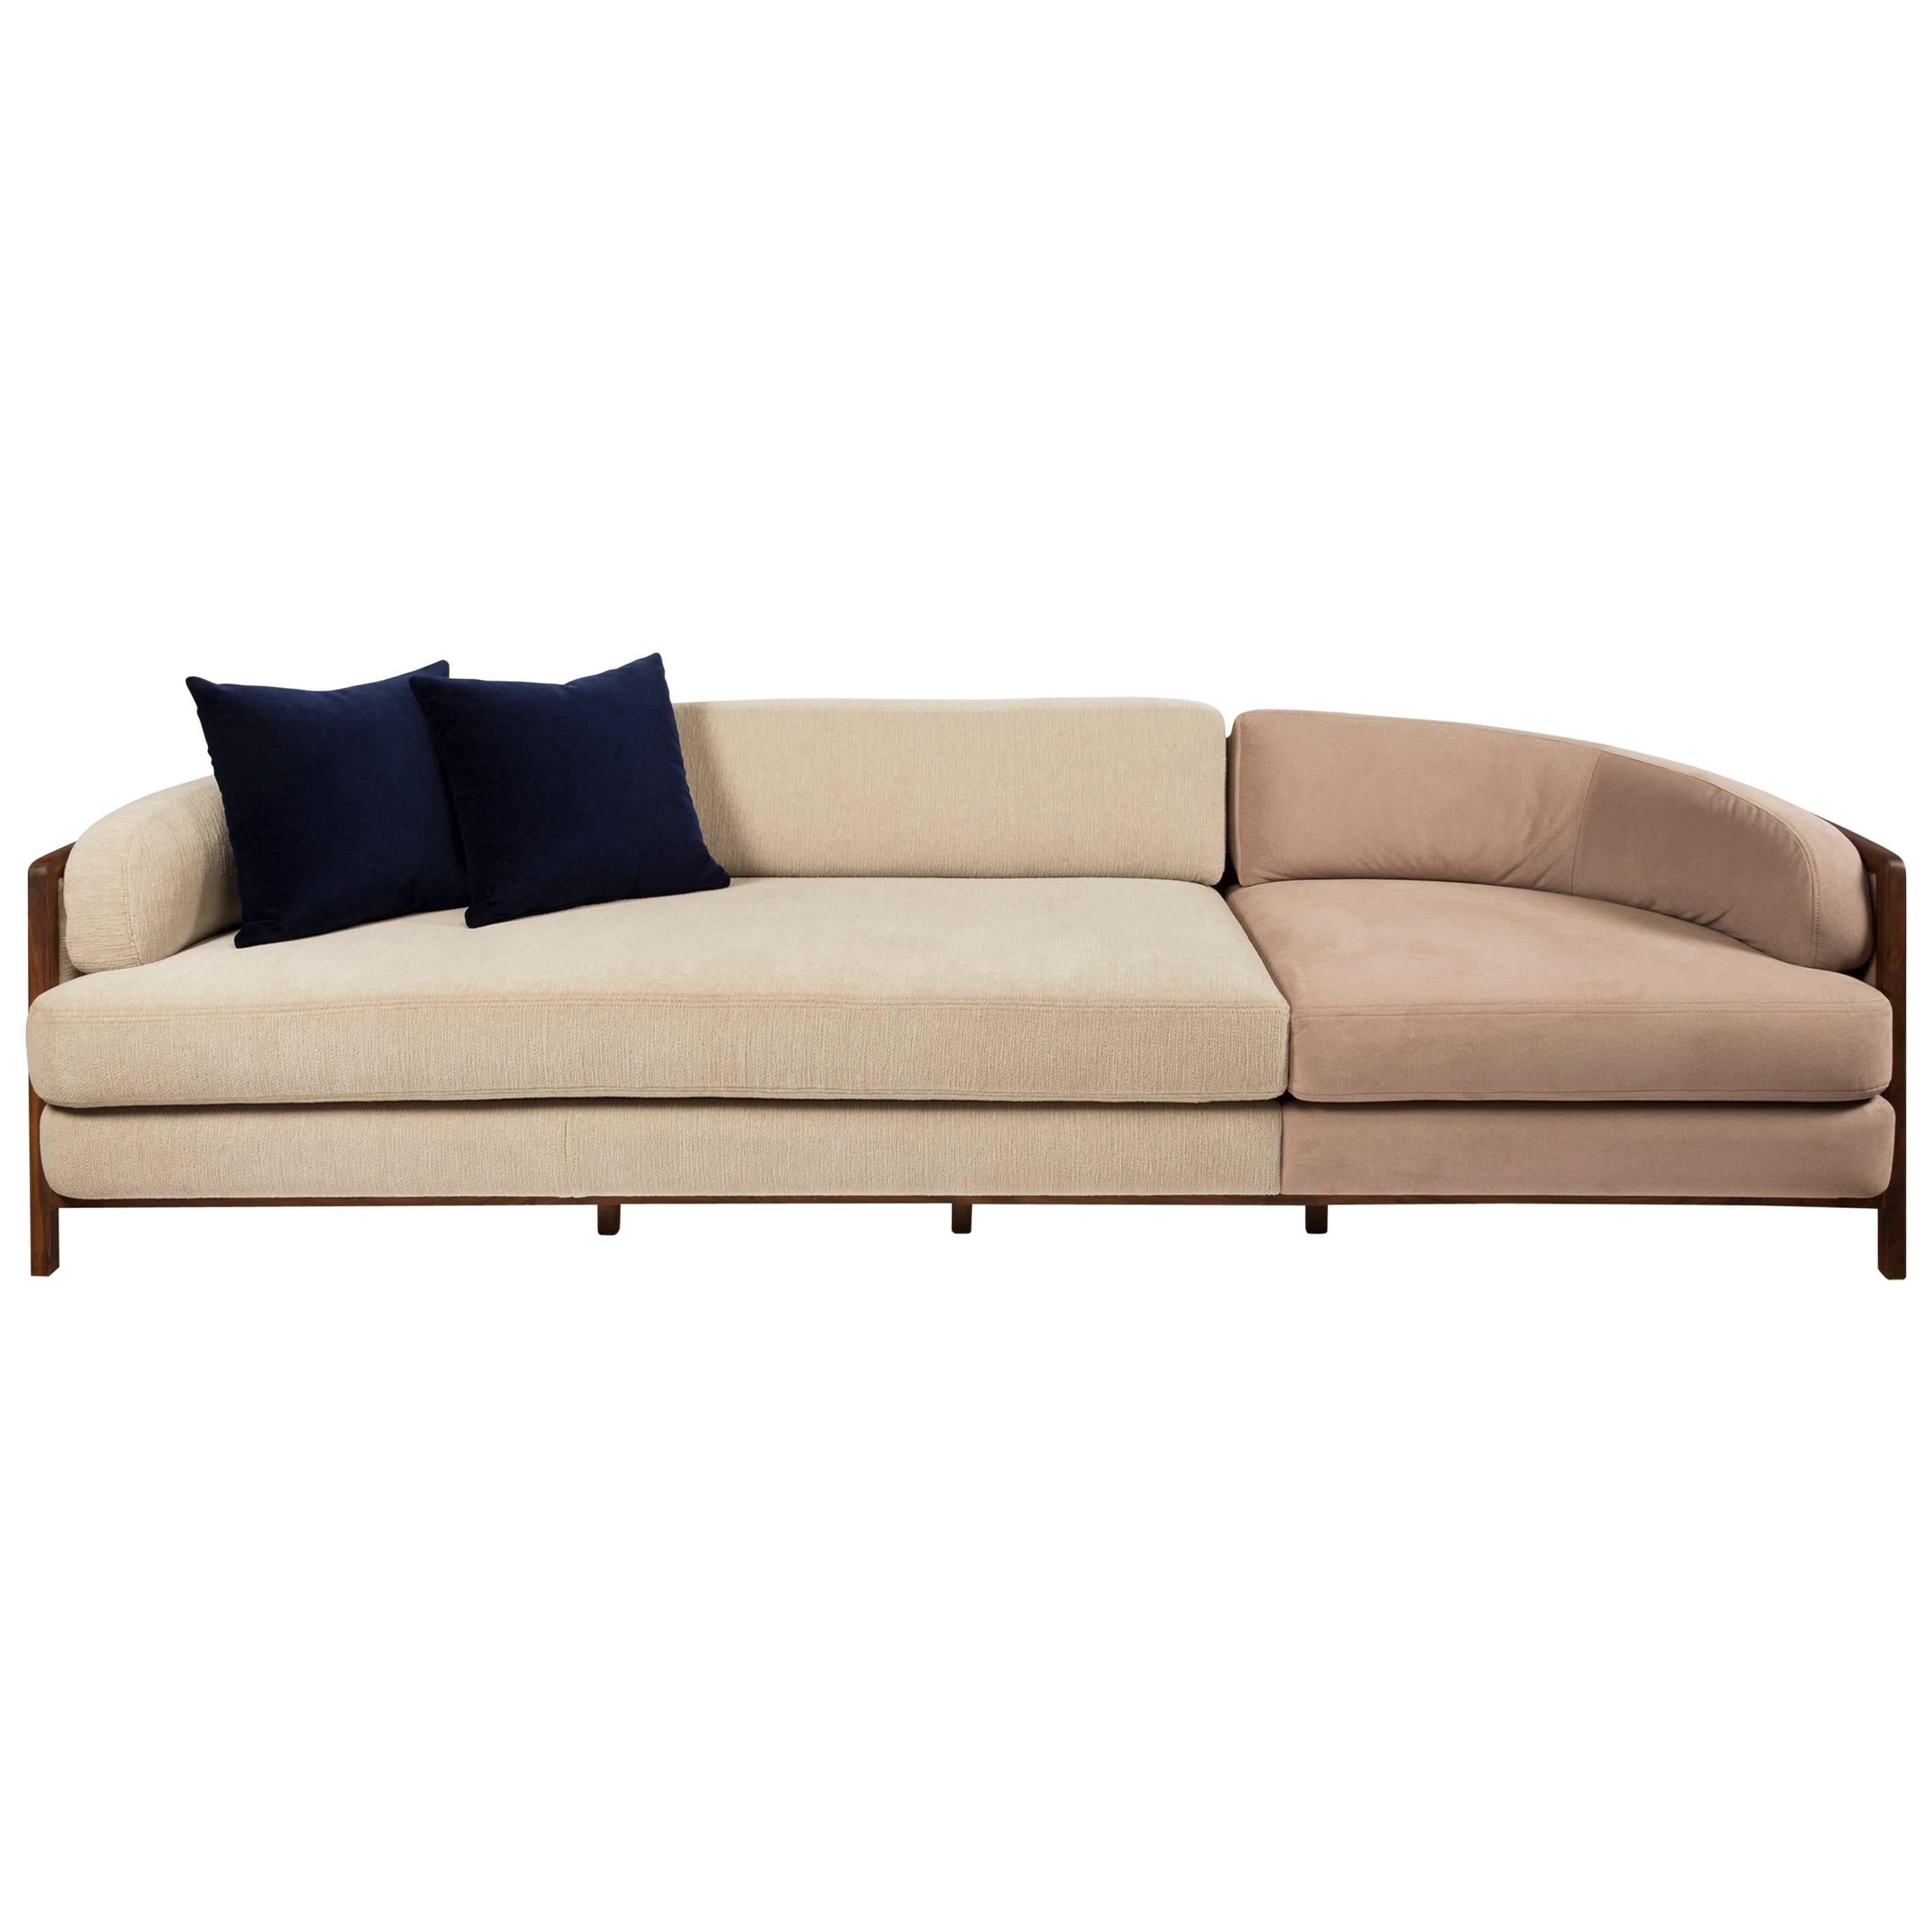 Vago Sofa in Walnut Hardwood with Wicker Back, Contemporary Design For Sale